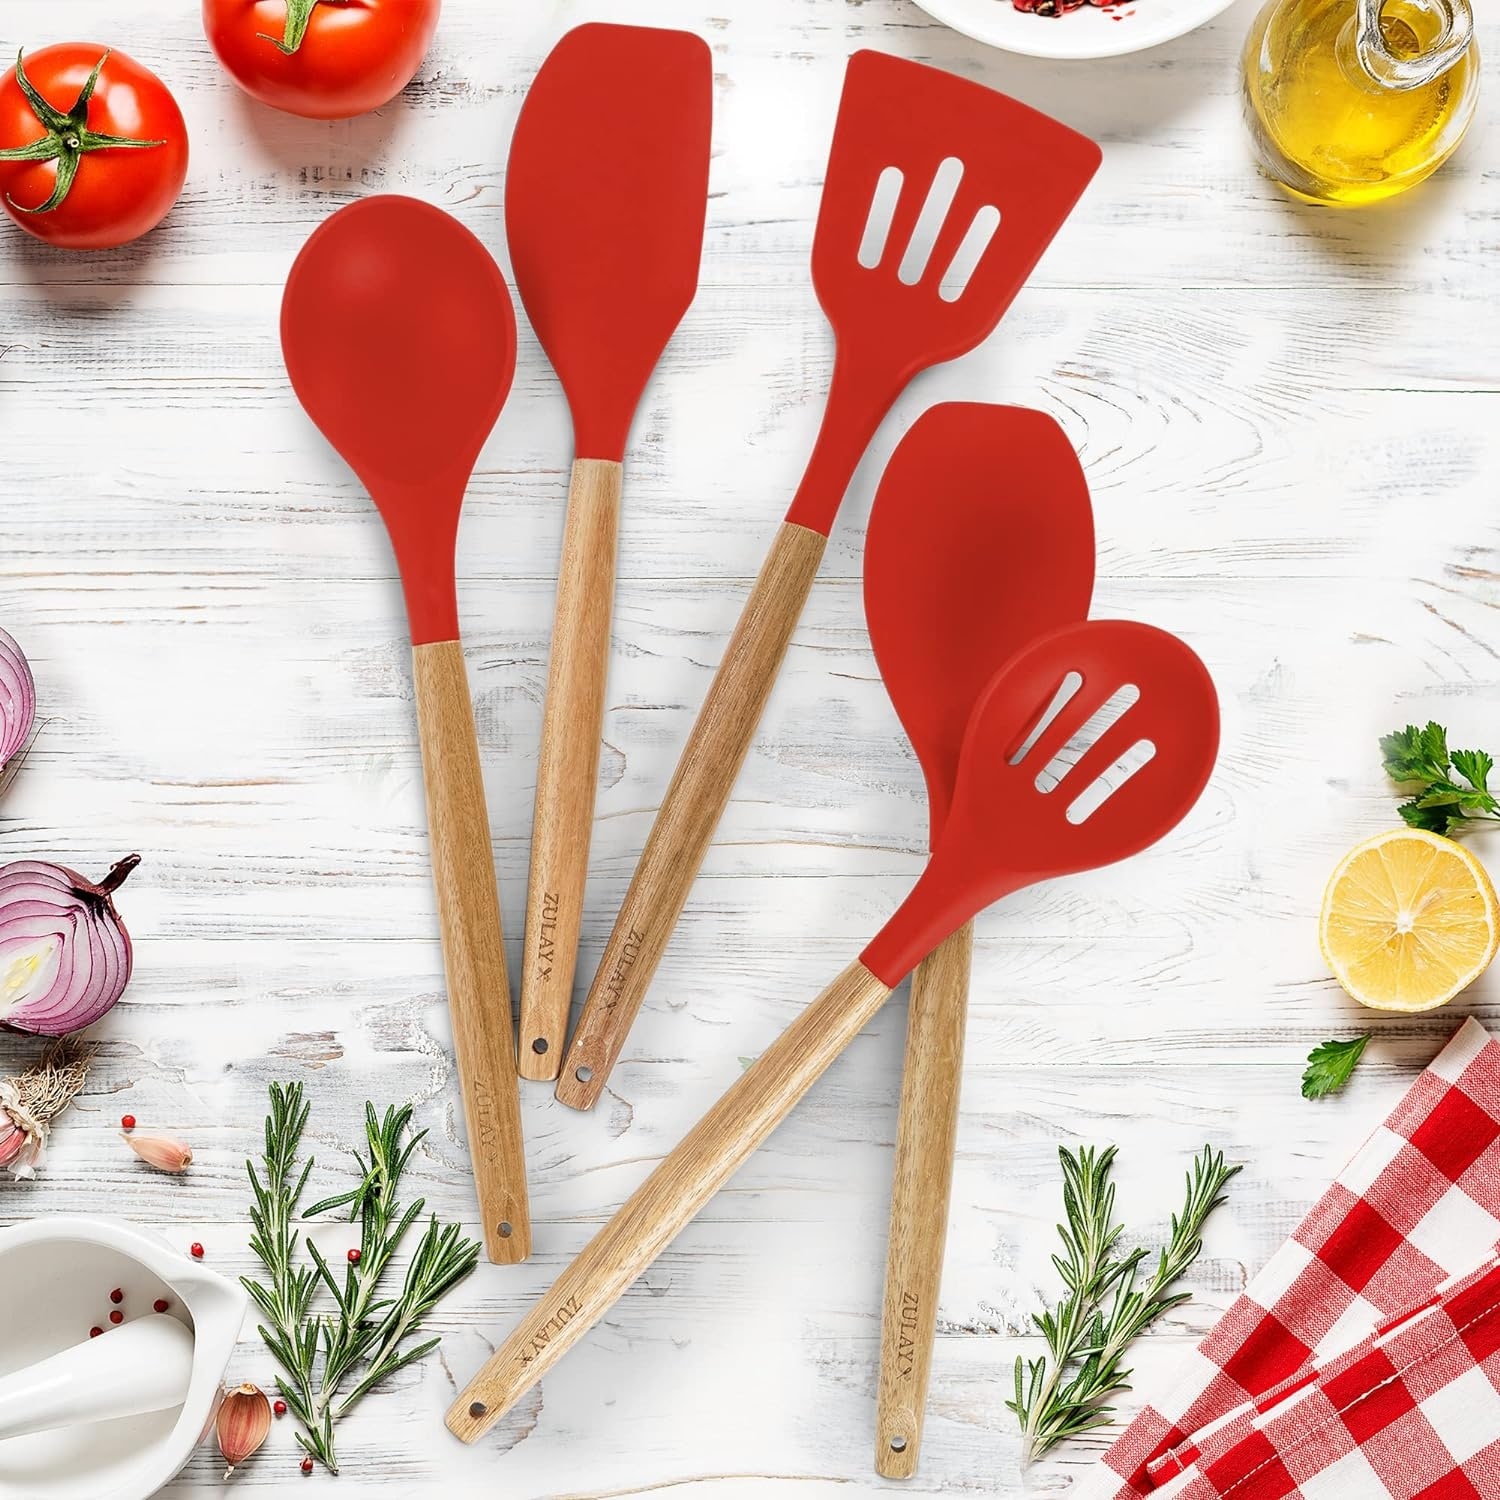 https://ak1.ostkcdn.com/images/products/is/images/direct/f683c0ab0ee34bfe5a5704ea701cc17517e832ab/Zulay-Kitchen-Premium-5-Piece-Silicone-Utensils-Set-with-Authentic-Acacia-Hardwood-Handles.jpg